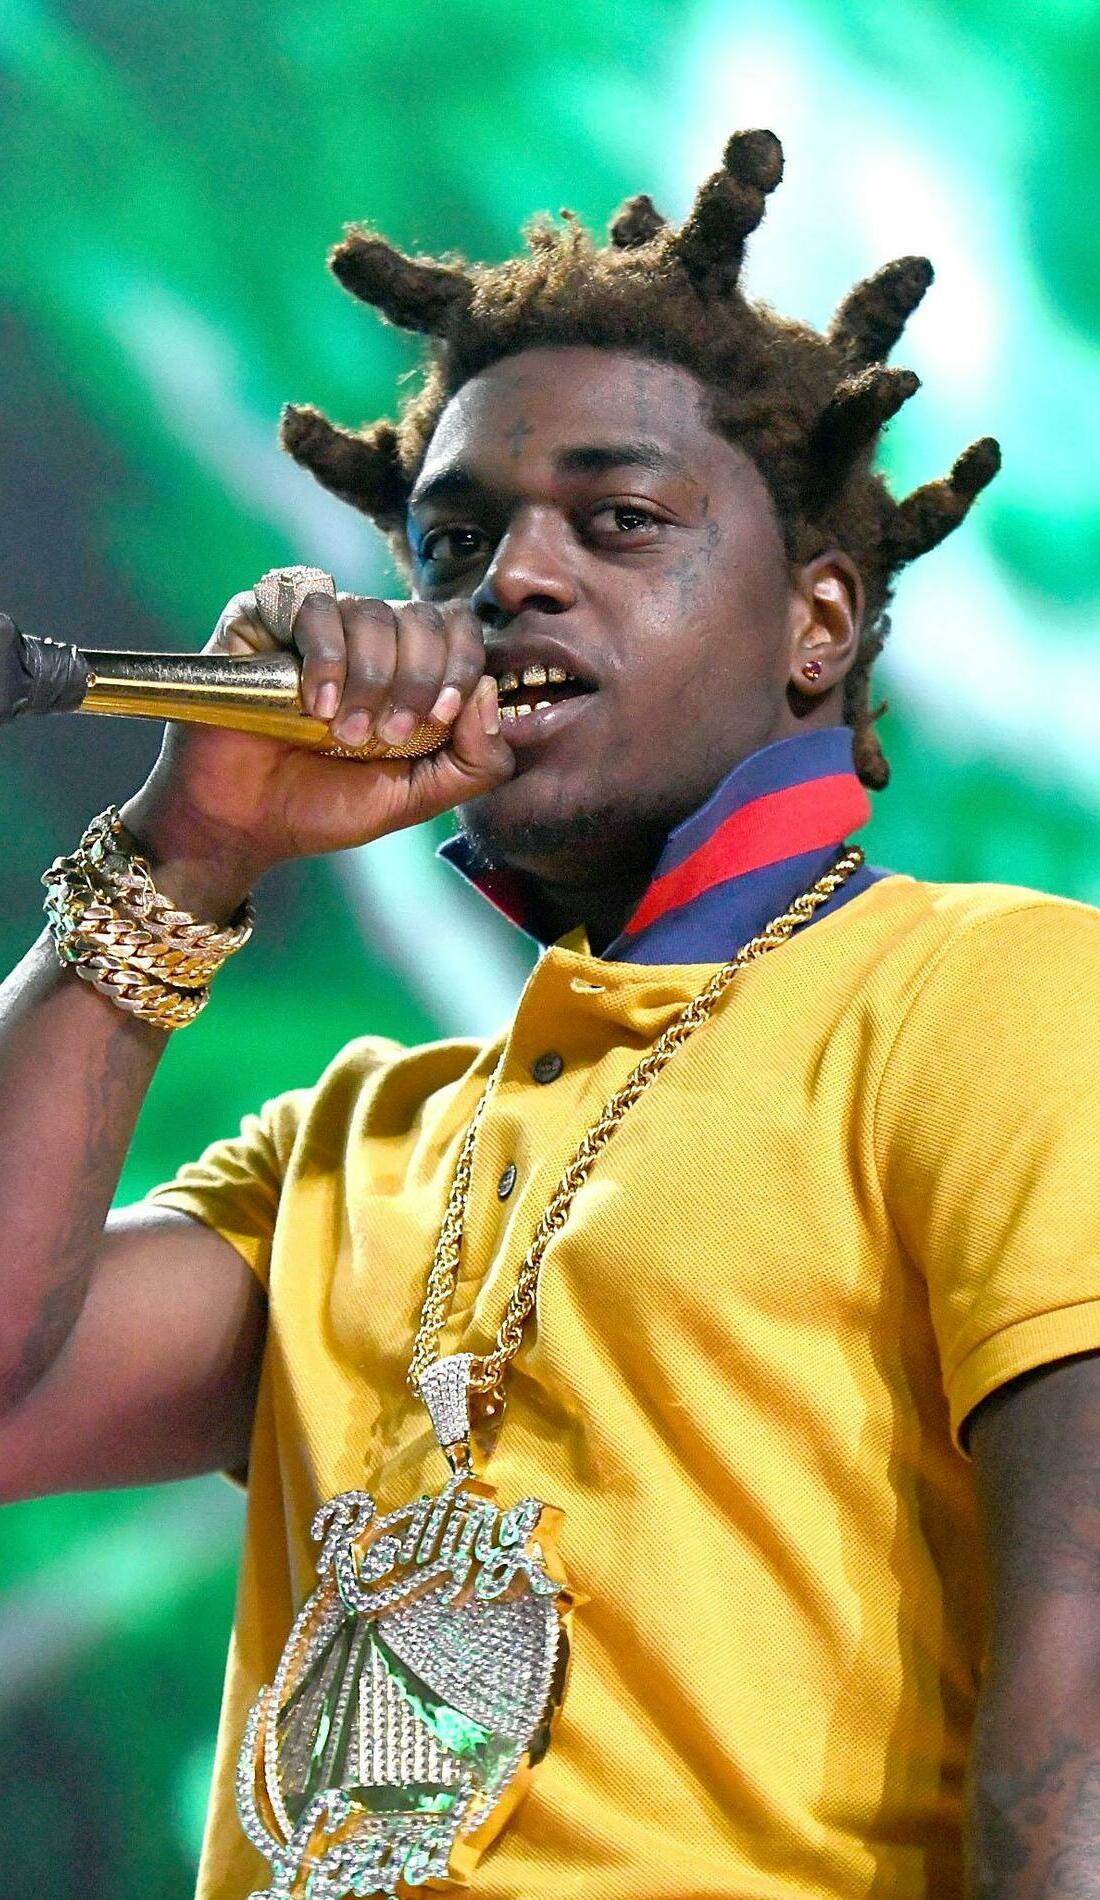 Kodak Black Tour 2023/2024 - Find Dates and Tickets - Stereoboard